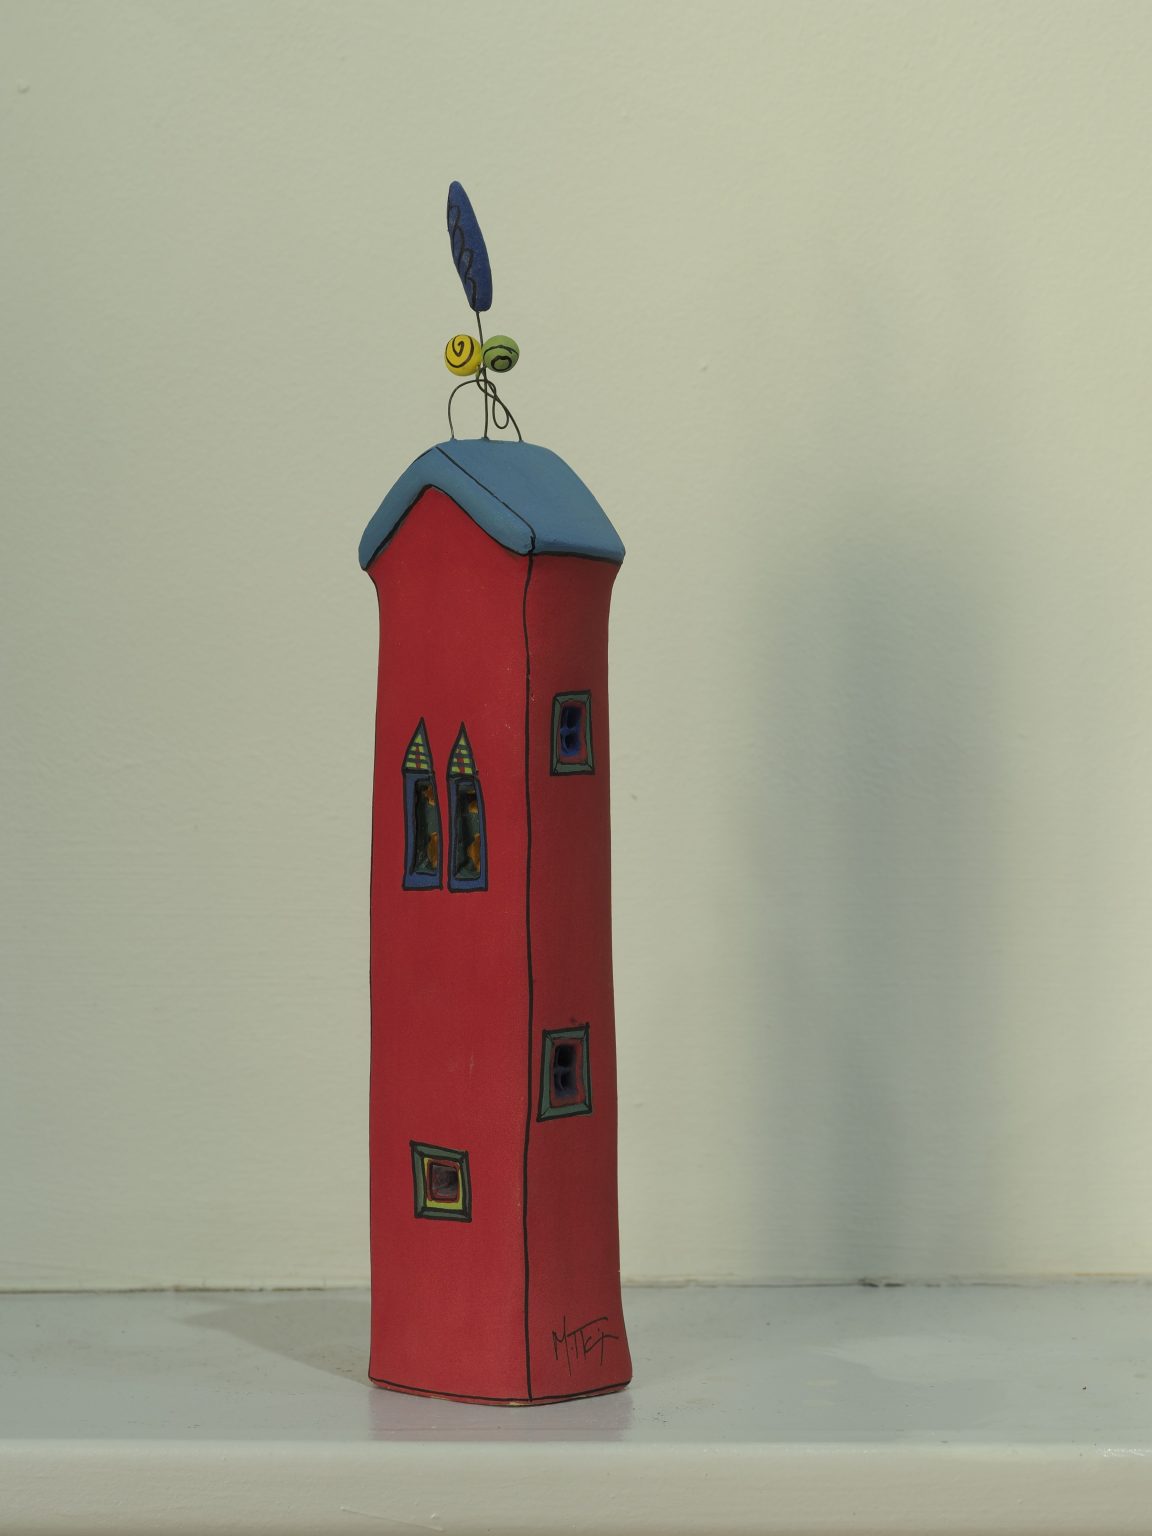 ceramic houses from Maria Petratou's collection